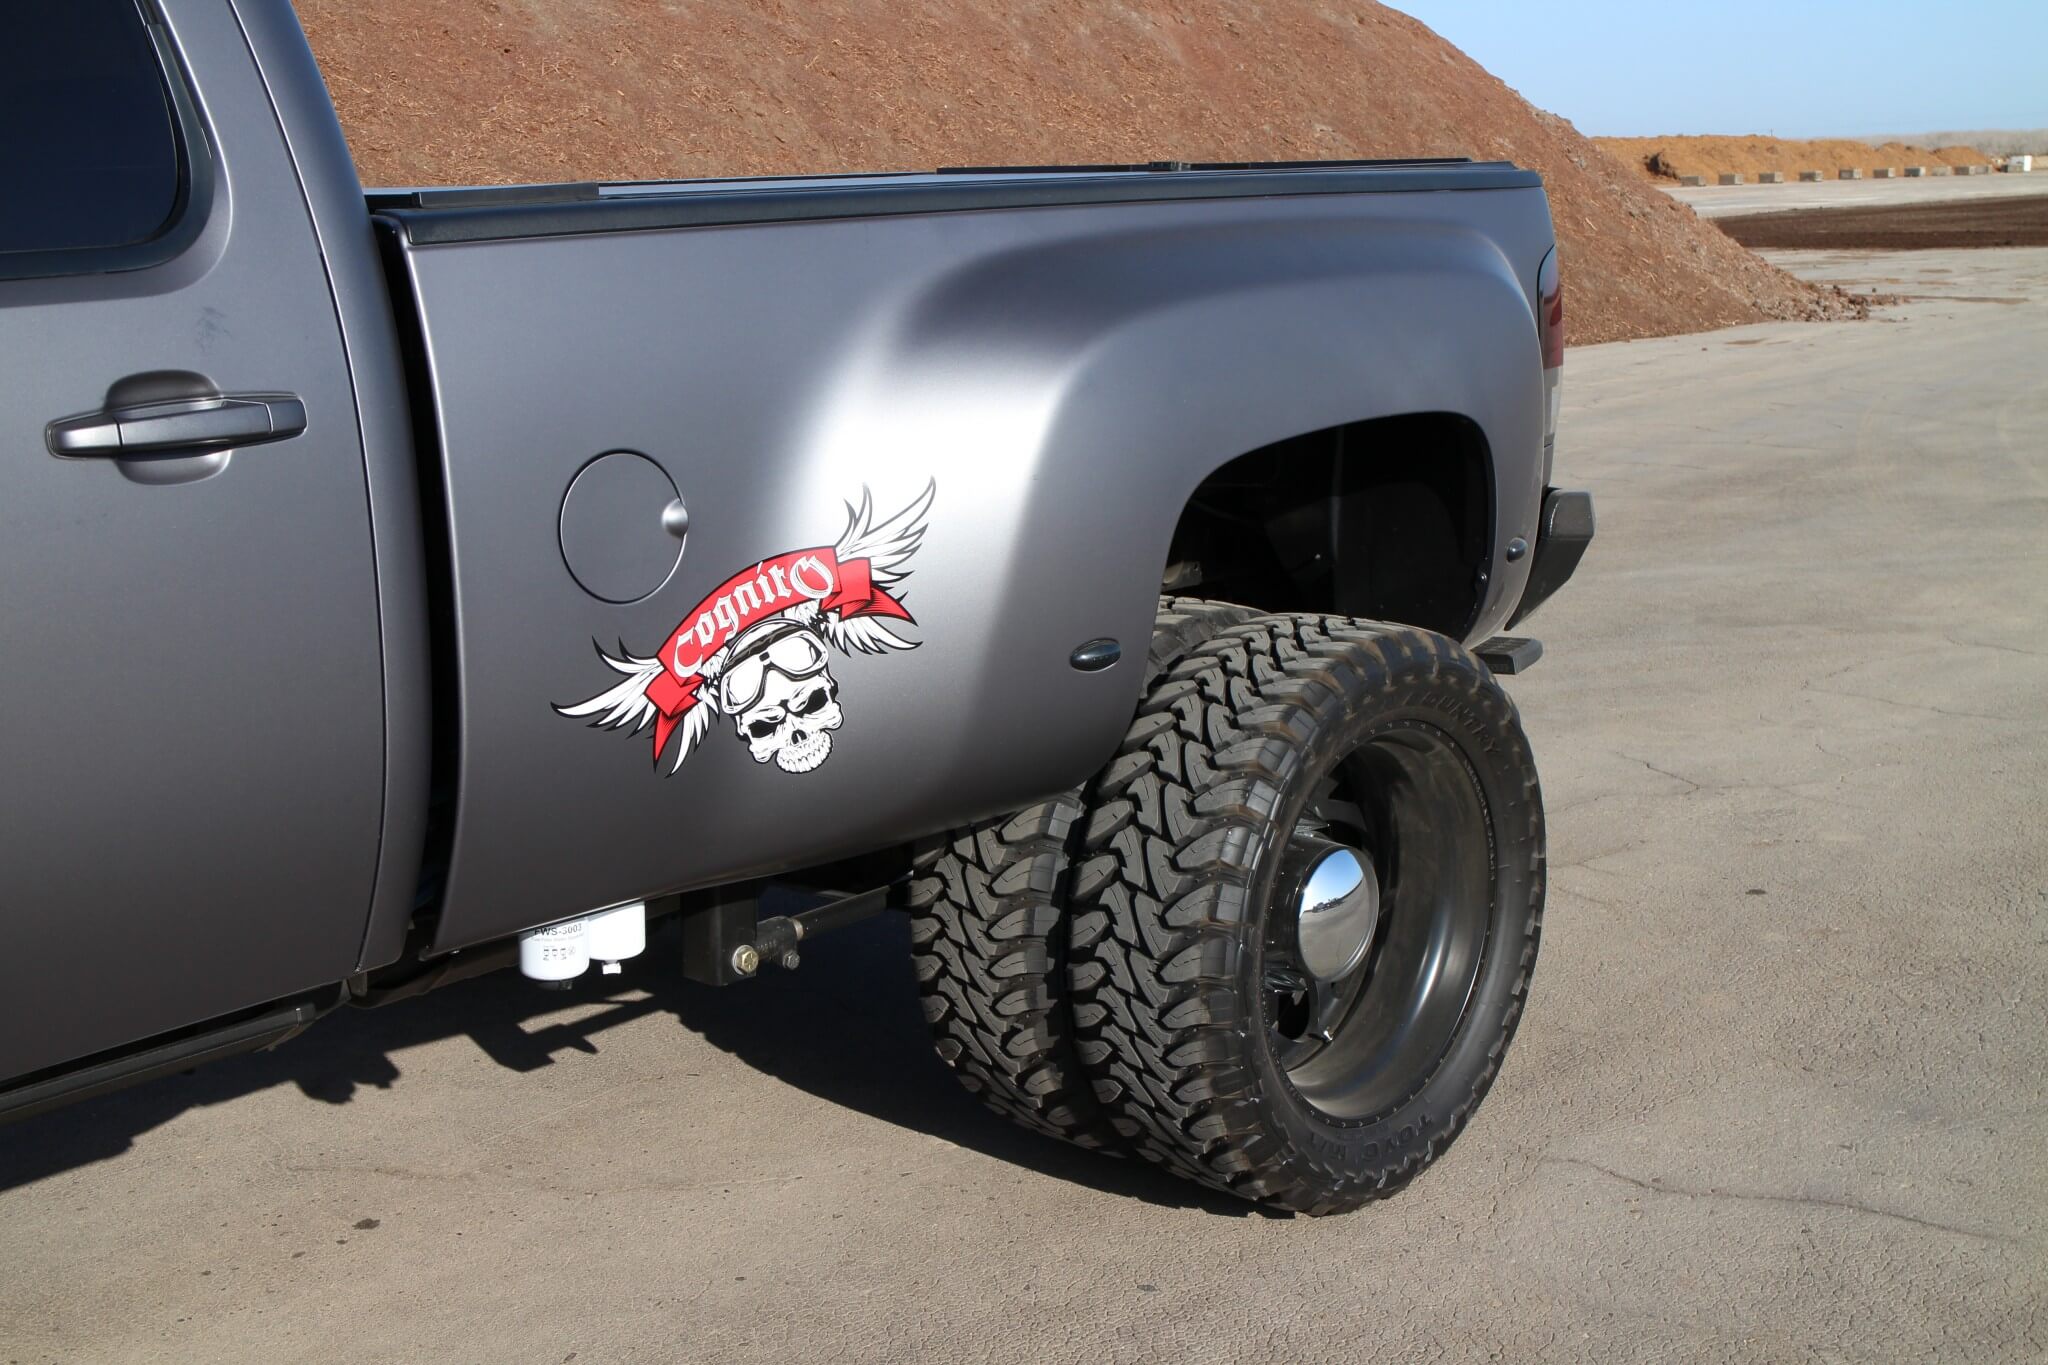 The main emphasis of the build was to convert a Silverado standard bed into a dually. A dually rear differential complete with 3500 series brakes was purchased from the Internet. Four American Force Weapon matte black dually wheels and Toyo Open Country M/T tires contribute to the aggressive off-road appearance. 